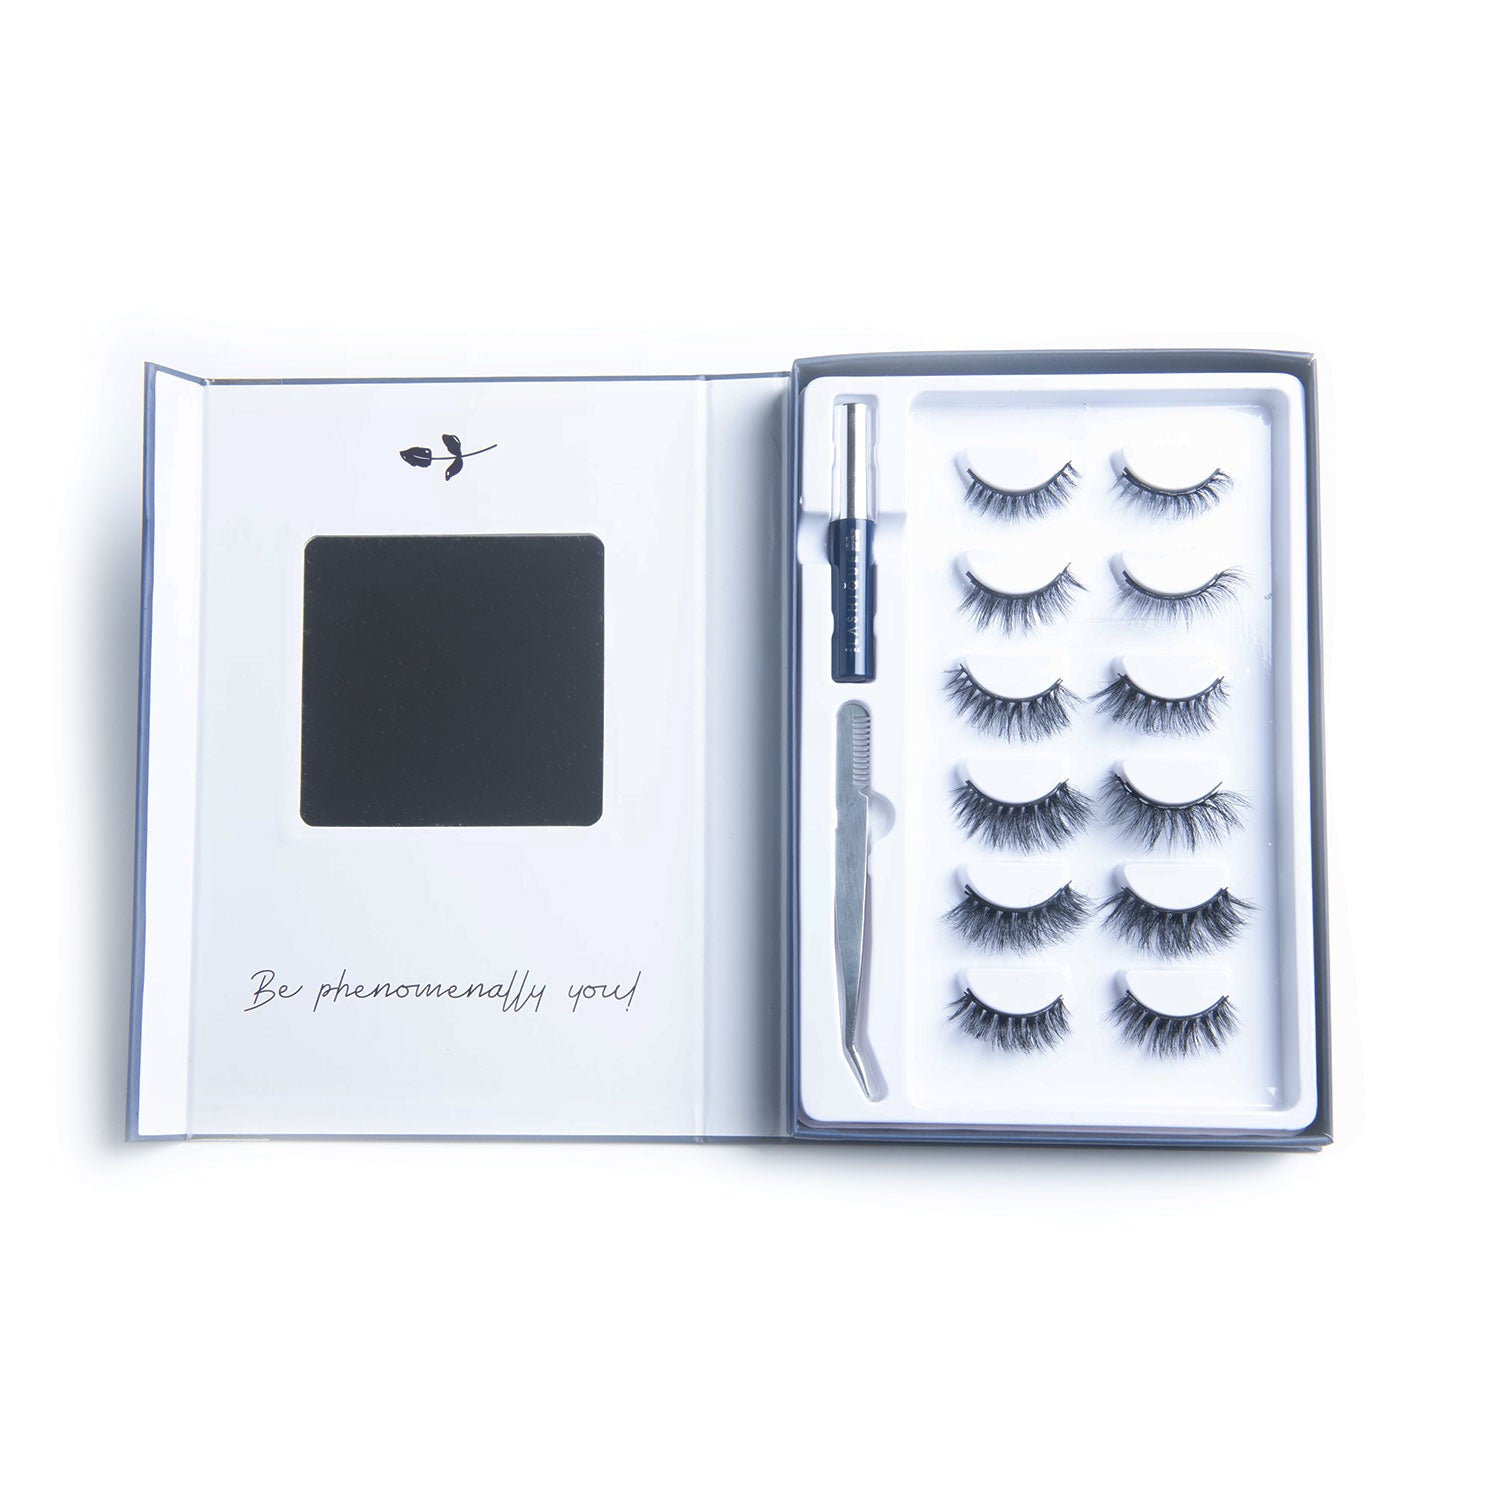 6 Pack of Magnetic Lashes, Magnetic Liner, Applicator